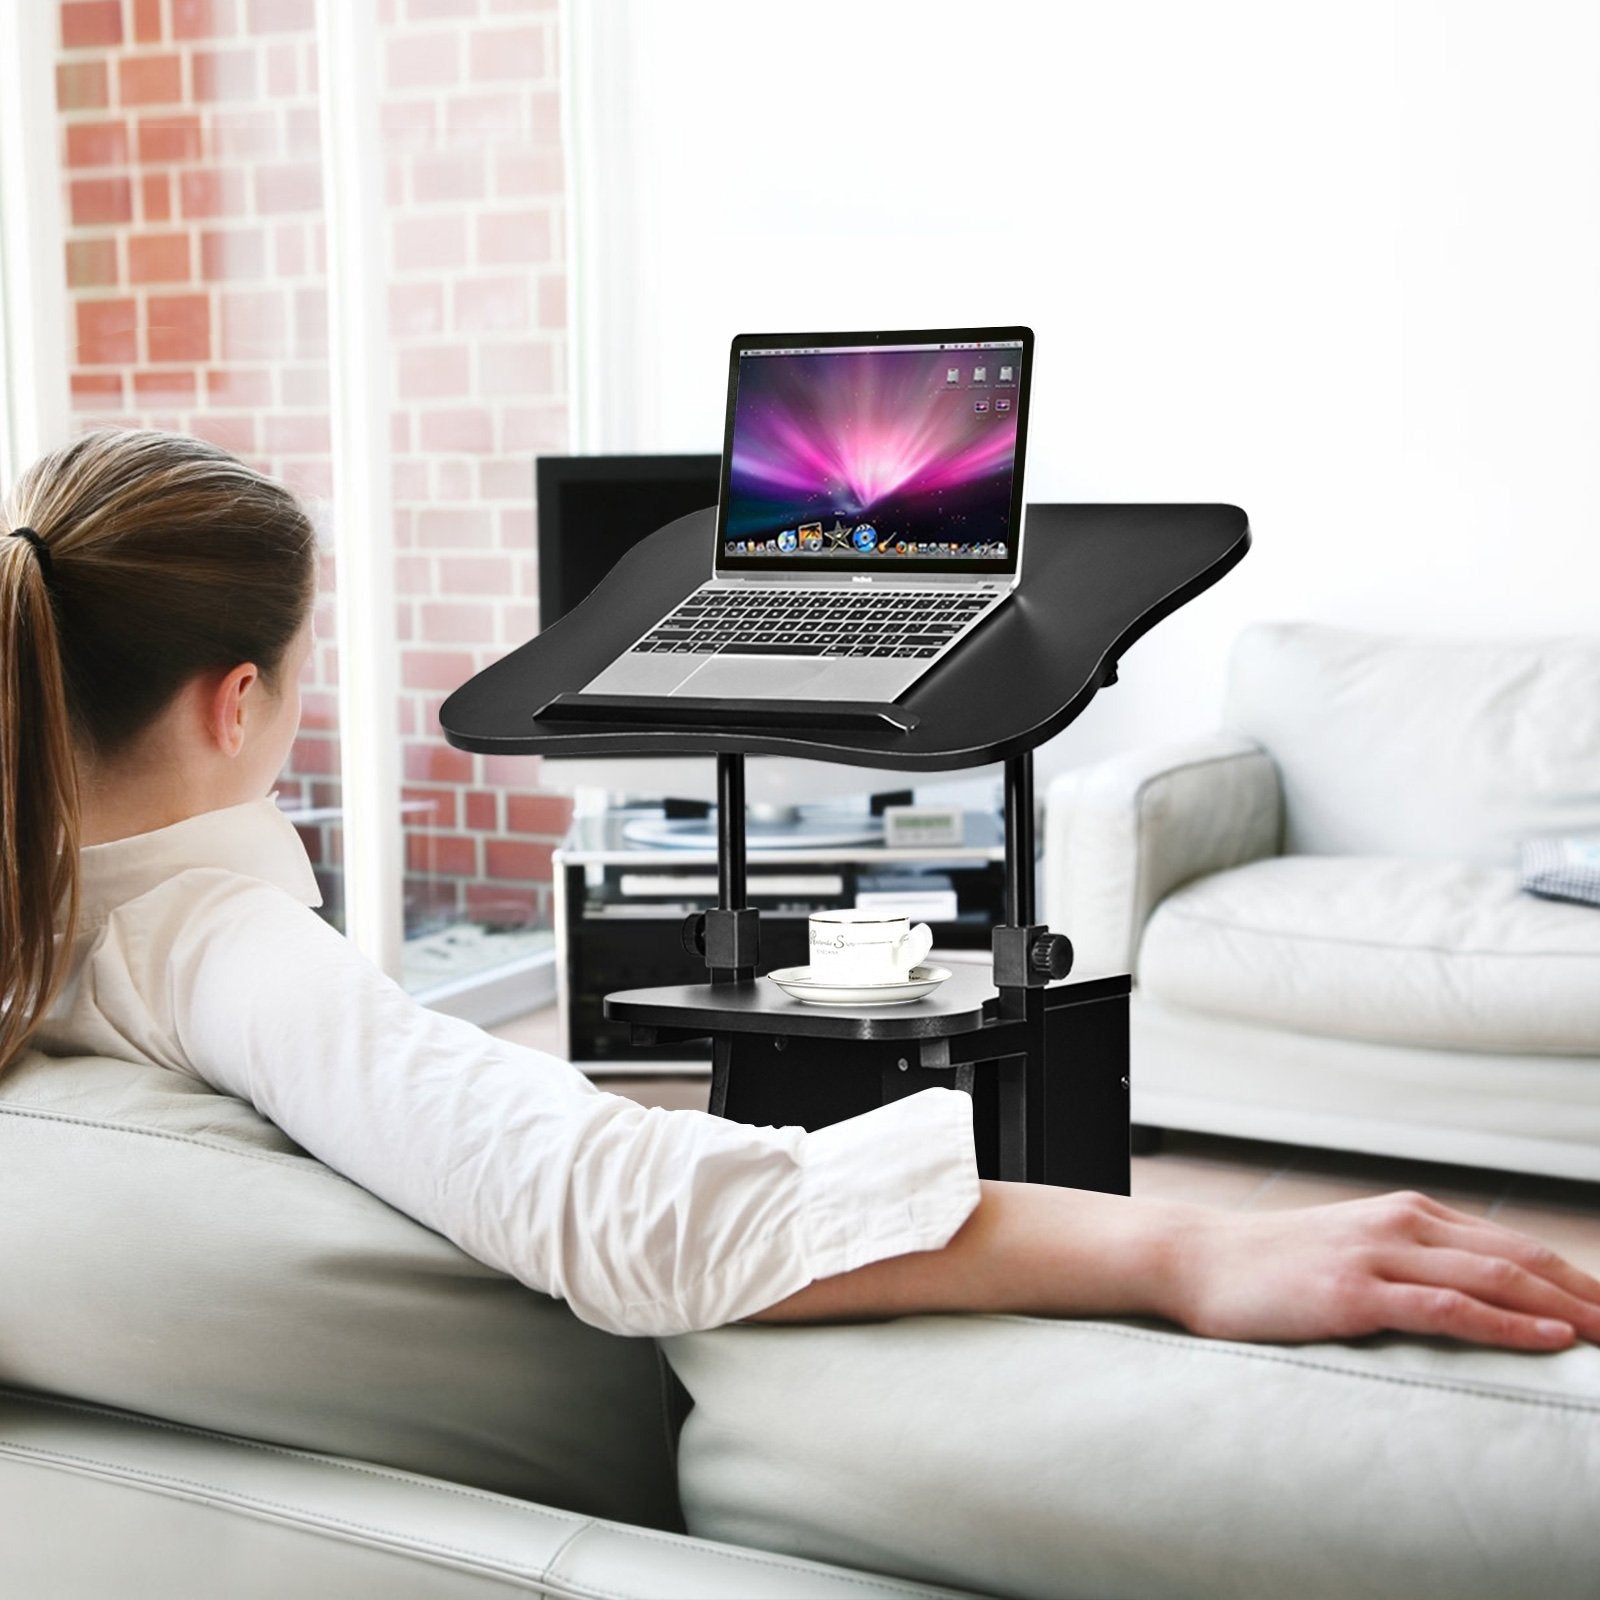 Sit-to-Stand Laptop Desk Cart Height Adjustable with Storage, Black - Gallery Canada